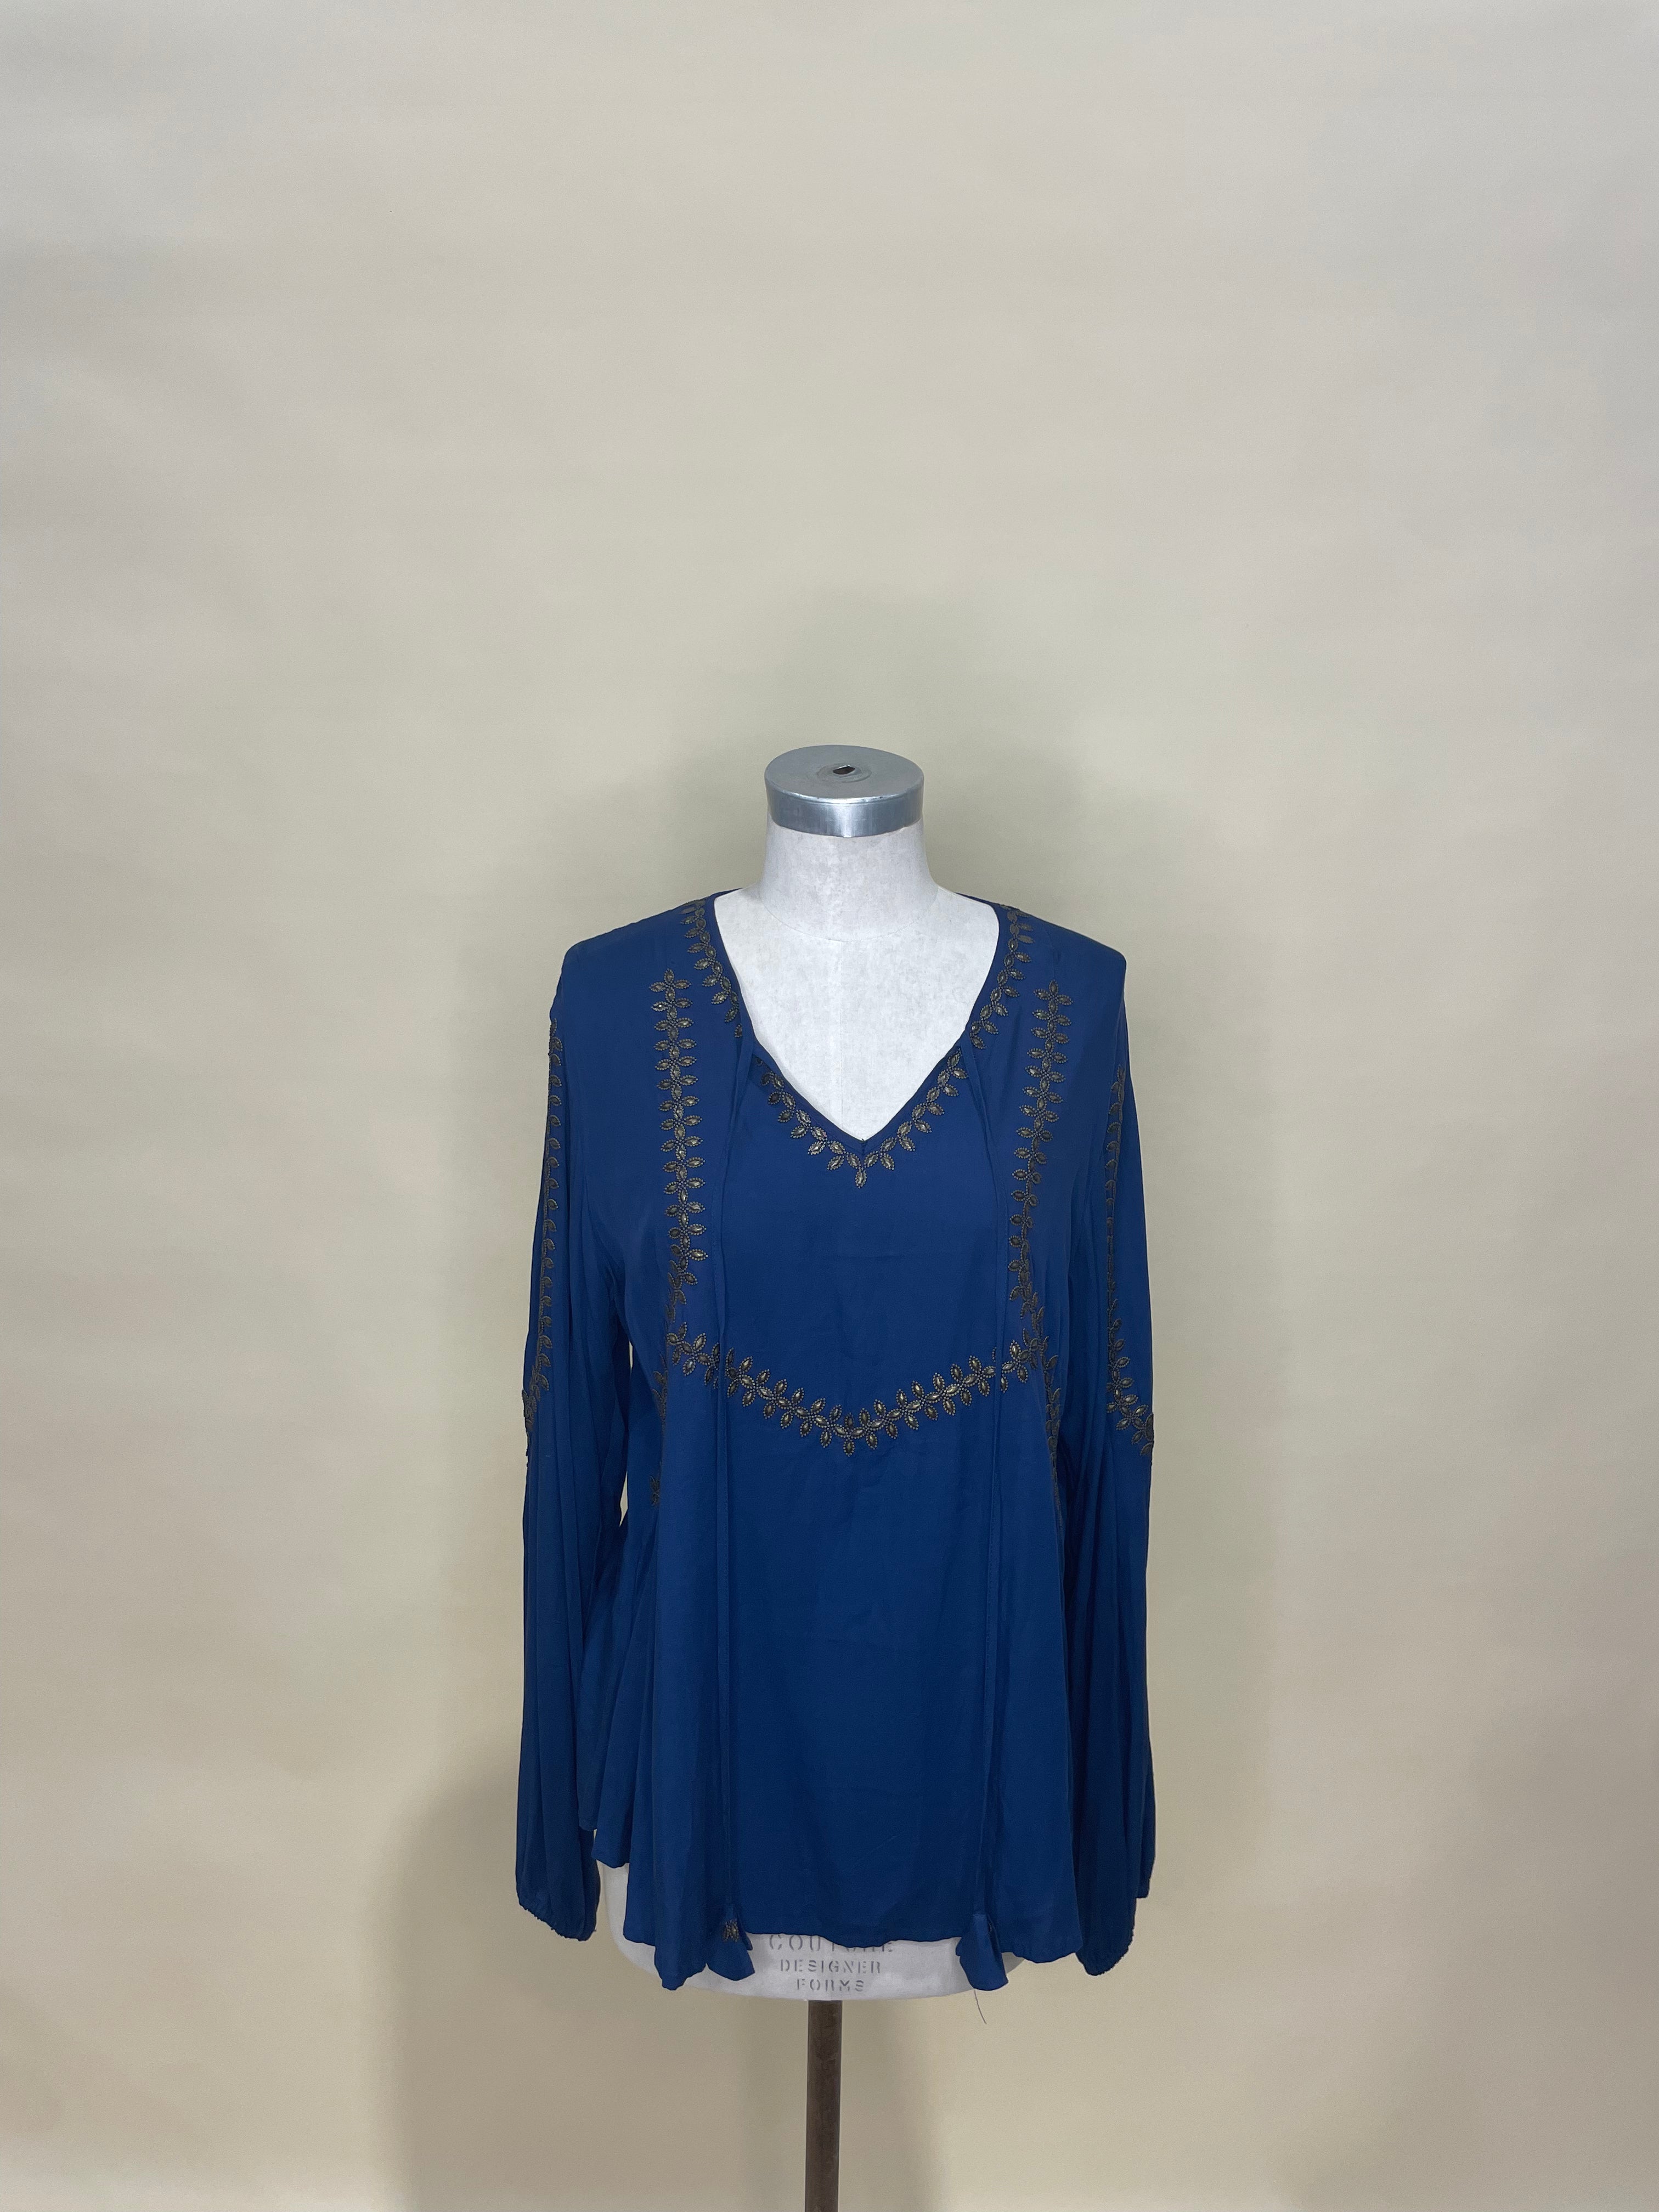 Metal Embroidered Navy Blouse